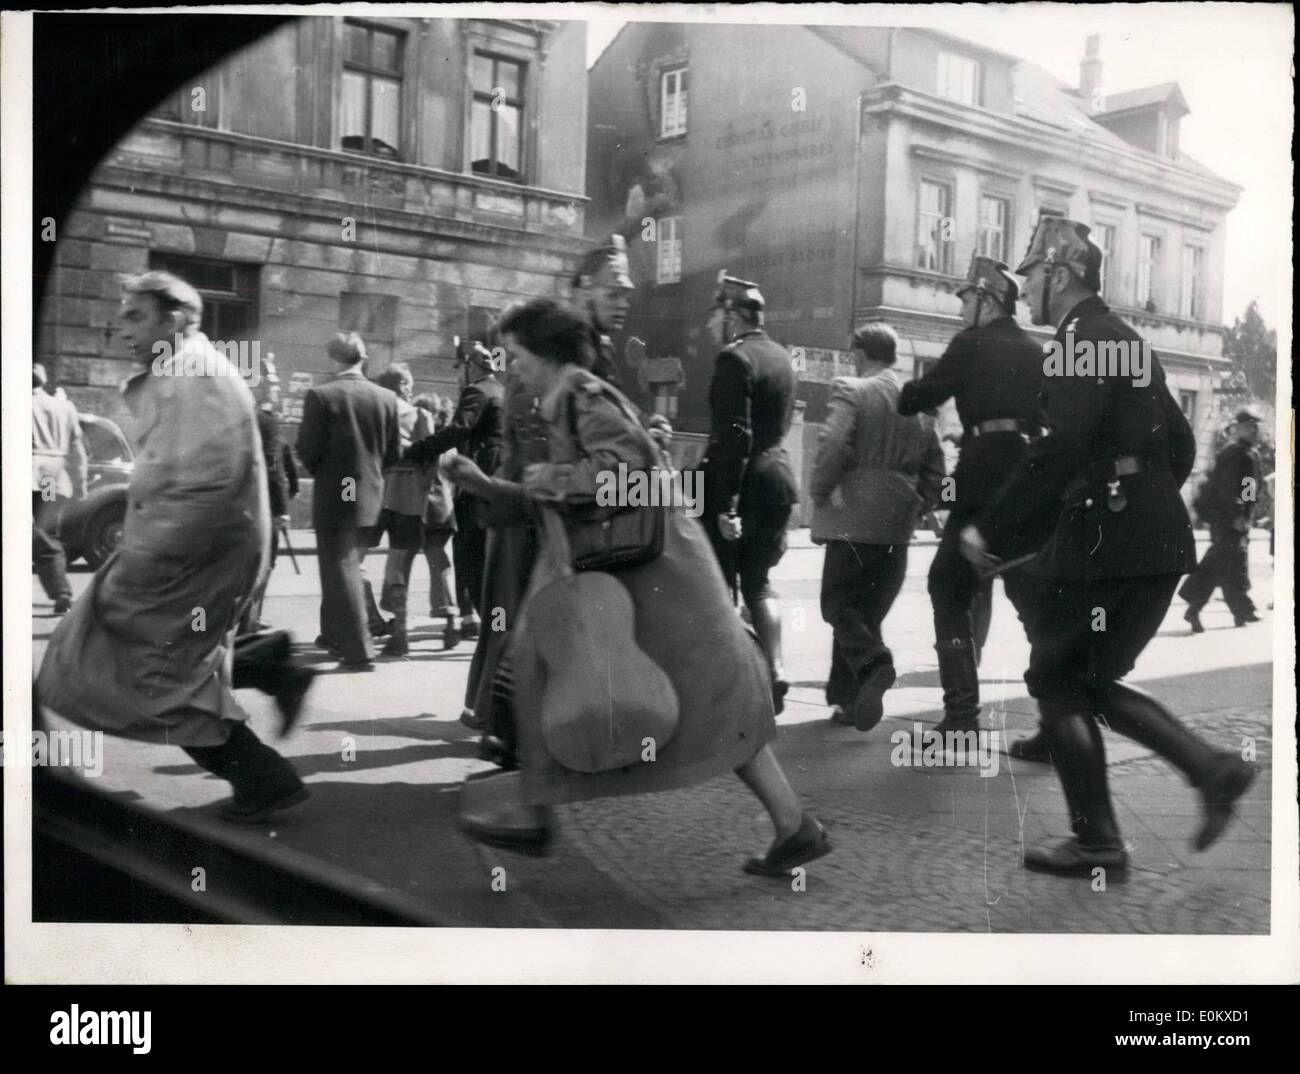 May 05, 1952 - Riots in Essen - following a demonstration prohibited by the Government. 12 May 1952 On Sunday, May 11th, 1952, big riots took place in Essen, western Germany, between hundreds of communist - ruled ''Free German Youth'' - organization (F.D.J.) and indigenous police-forces. One person was killed, two other suffered serious injuries, while many others were slightly injured. Approximately 100 persons were detained by the police. The official police-reports reads that approximately 30 Stock Photo